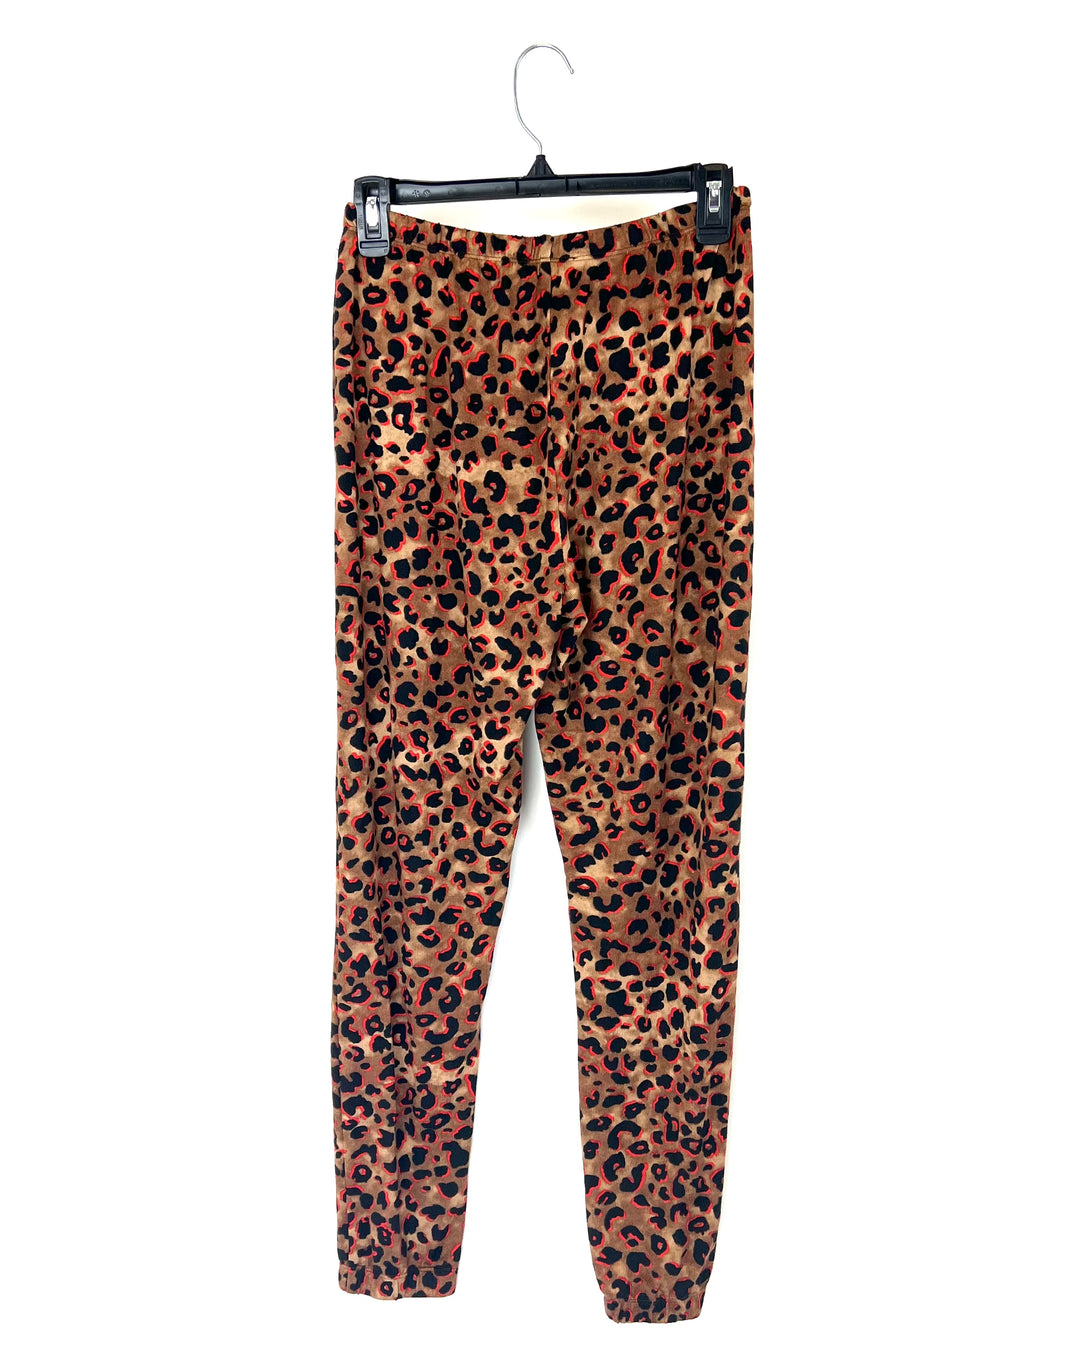 Leopard Brown and Red Print Sleepwear Pants - Size 4/6